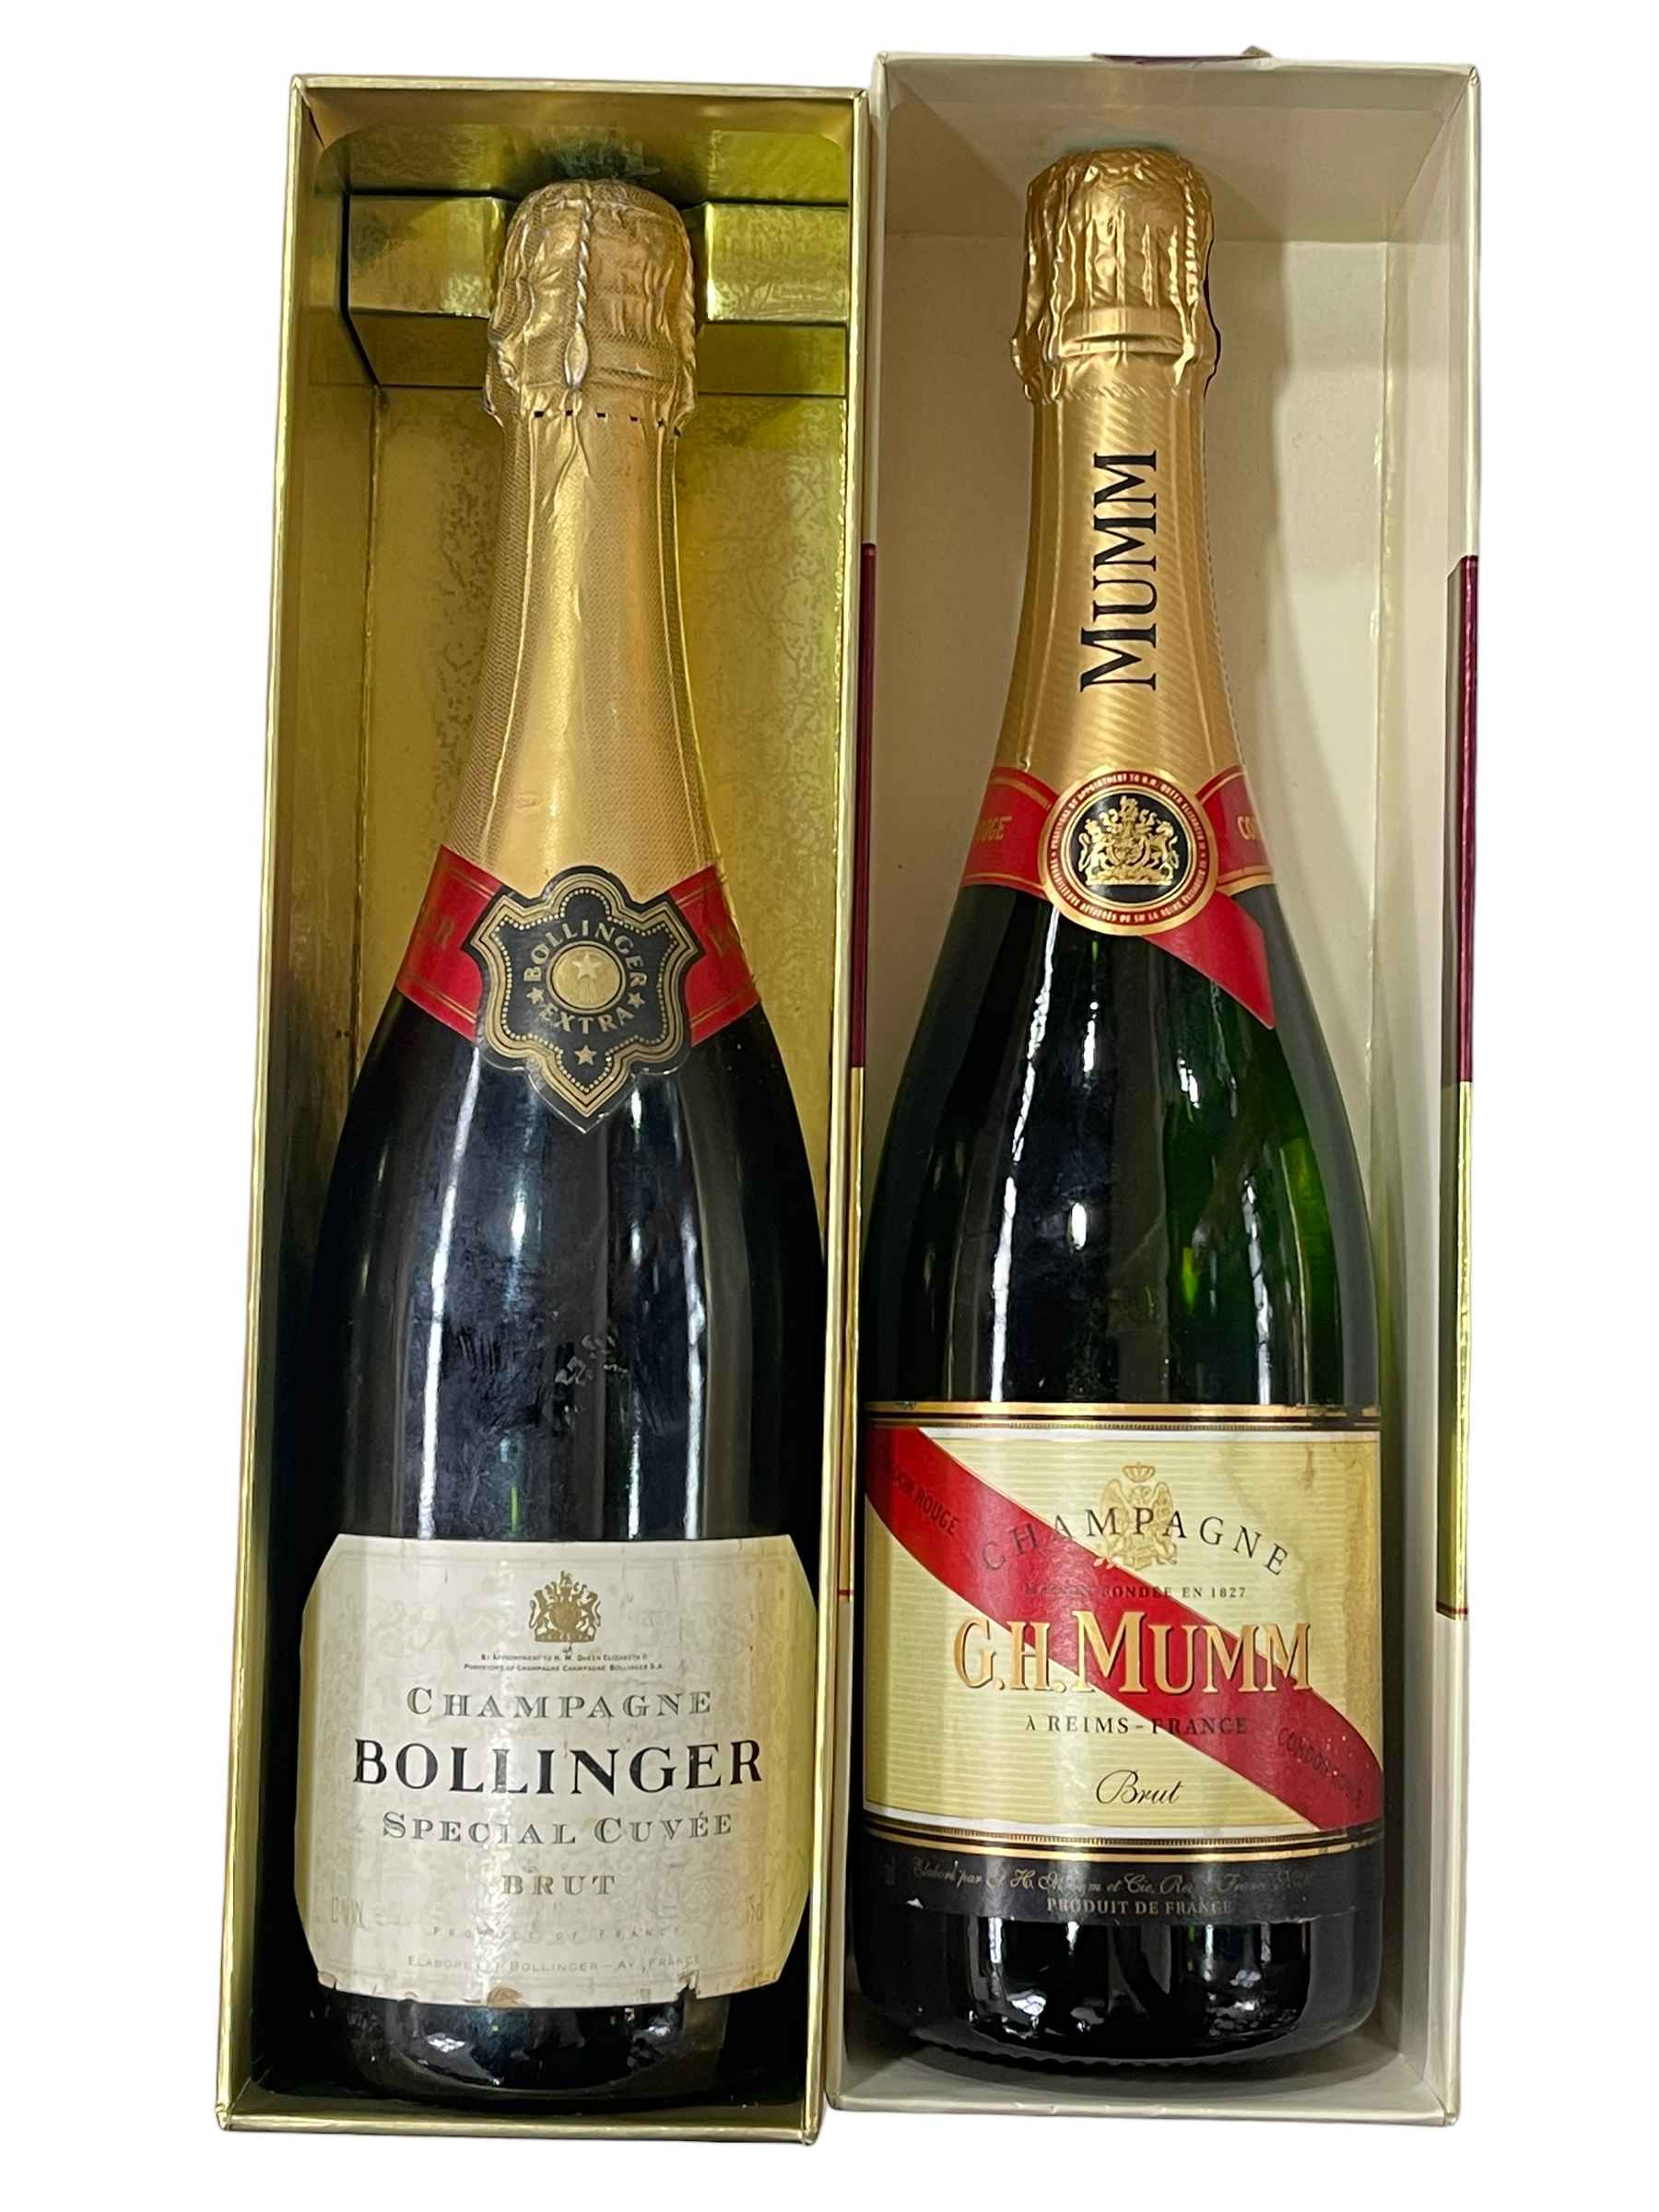 Two bottles of champagne, Bolinger and Mumm.